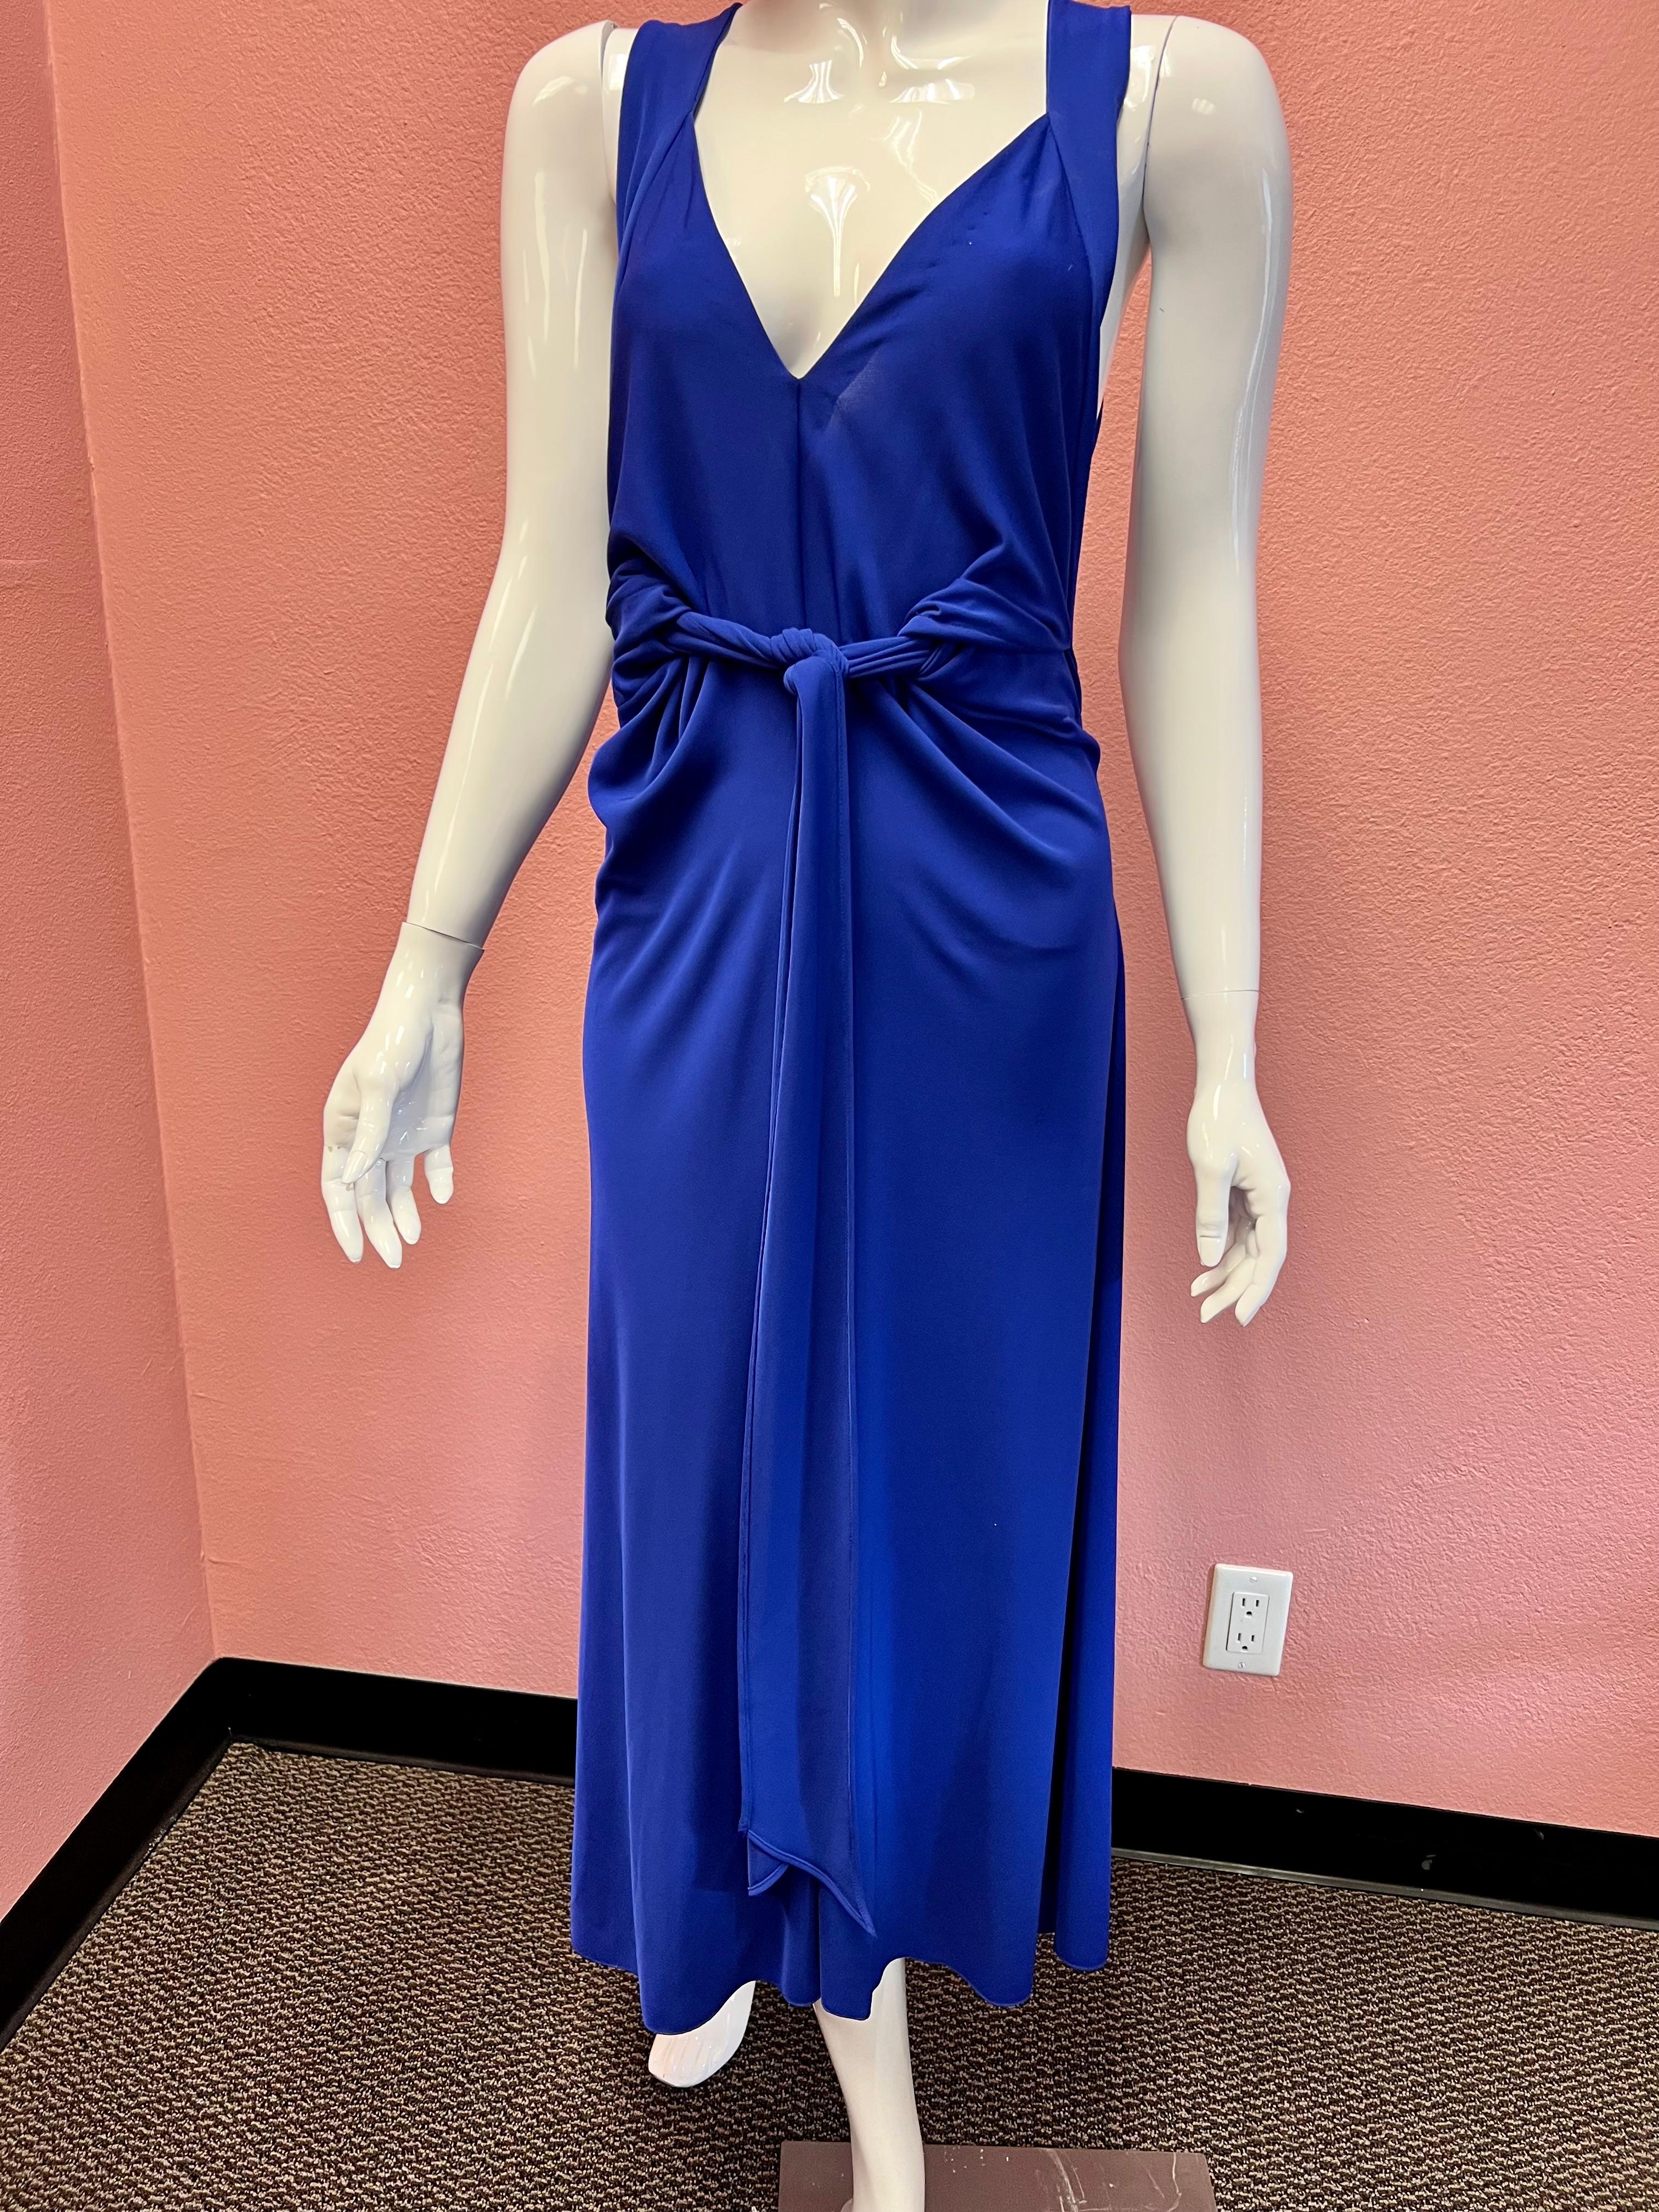 This dress is so classy and such a beautiful color. 

Indigo, sleeveless, ankle length with tie waist. 

The ability to tie it a the waist makes for a super flattering silhouette. 
Never been worn, tags are still on. 
Year 2010 Season Fall
Size F38.